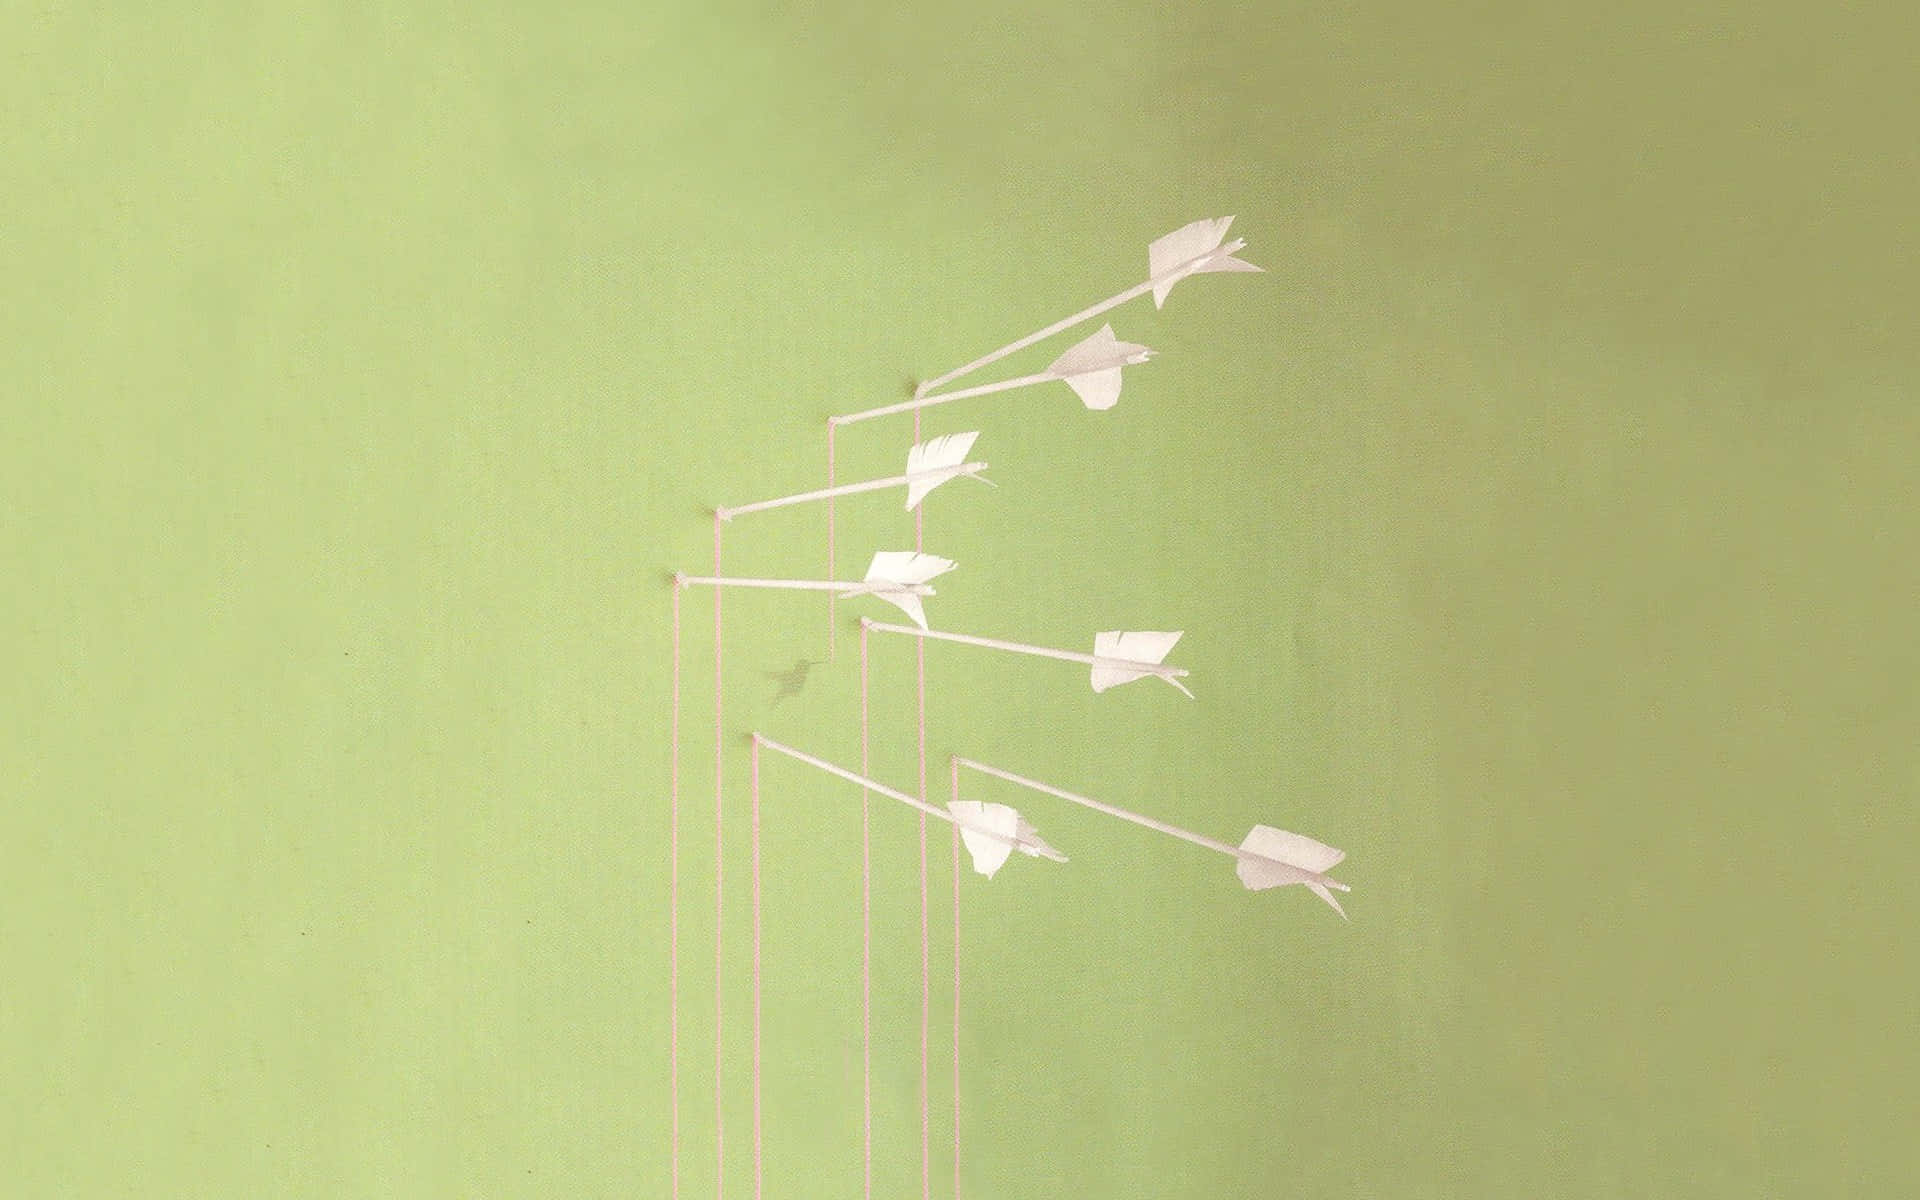 A Group Of Paper Birds On A Green Wall Wallpaper